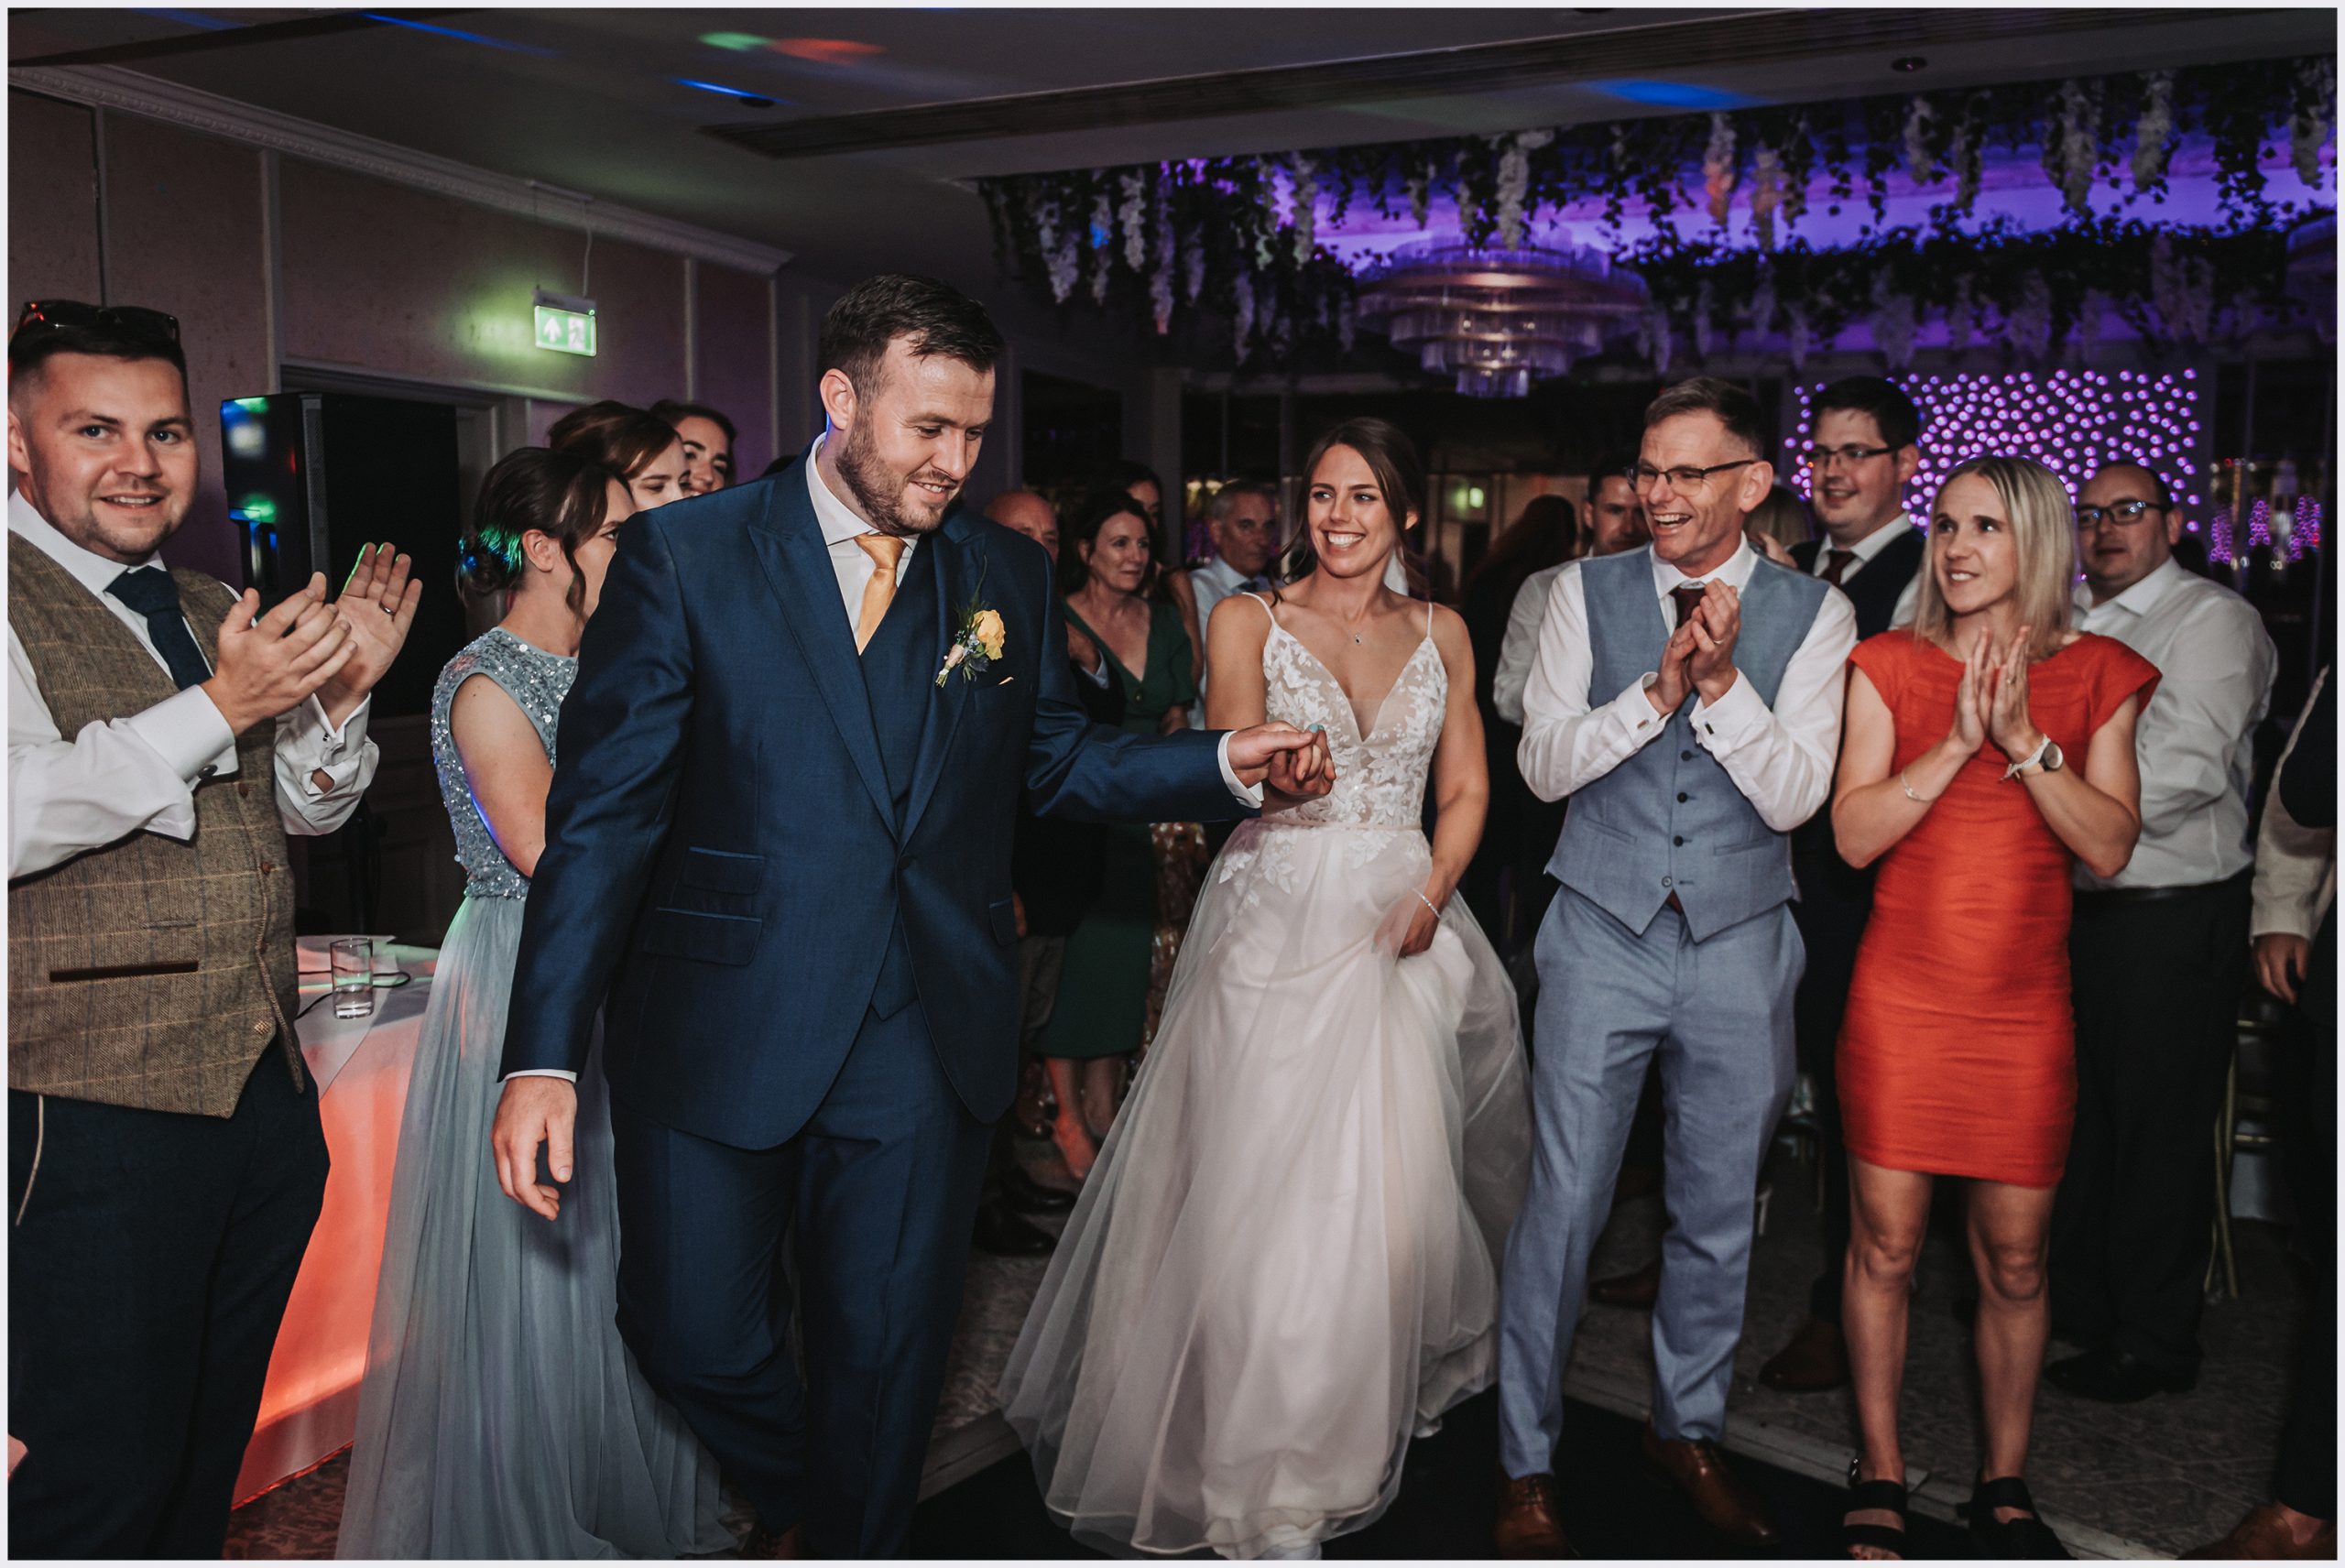 A proud groom leads his beautiful bride on to the dance floor to dance their first dance as man wife as their guests applaud and cheer.  Image captured by north wales based wedding photographer Helena Jayne Photography